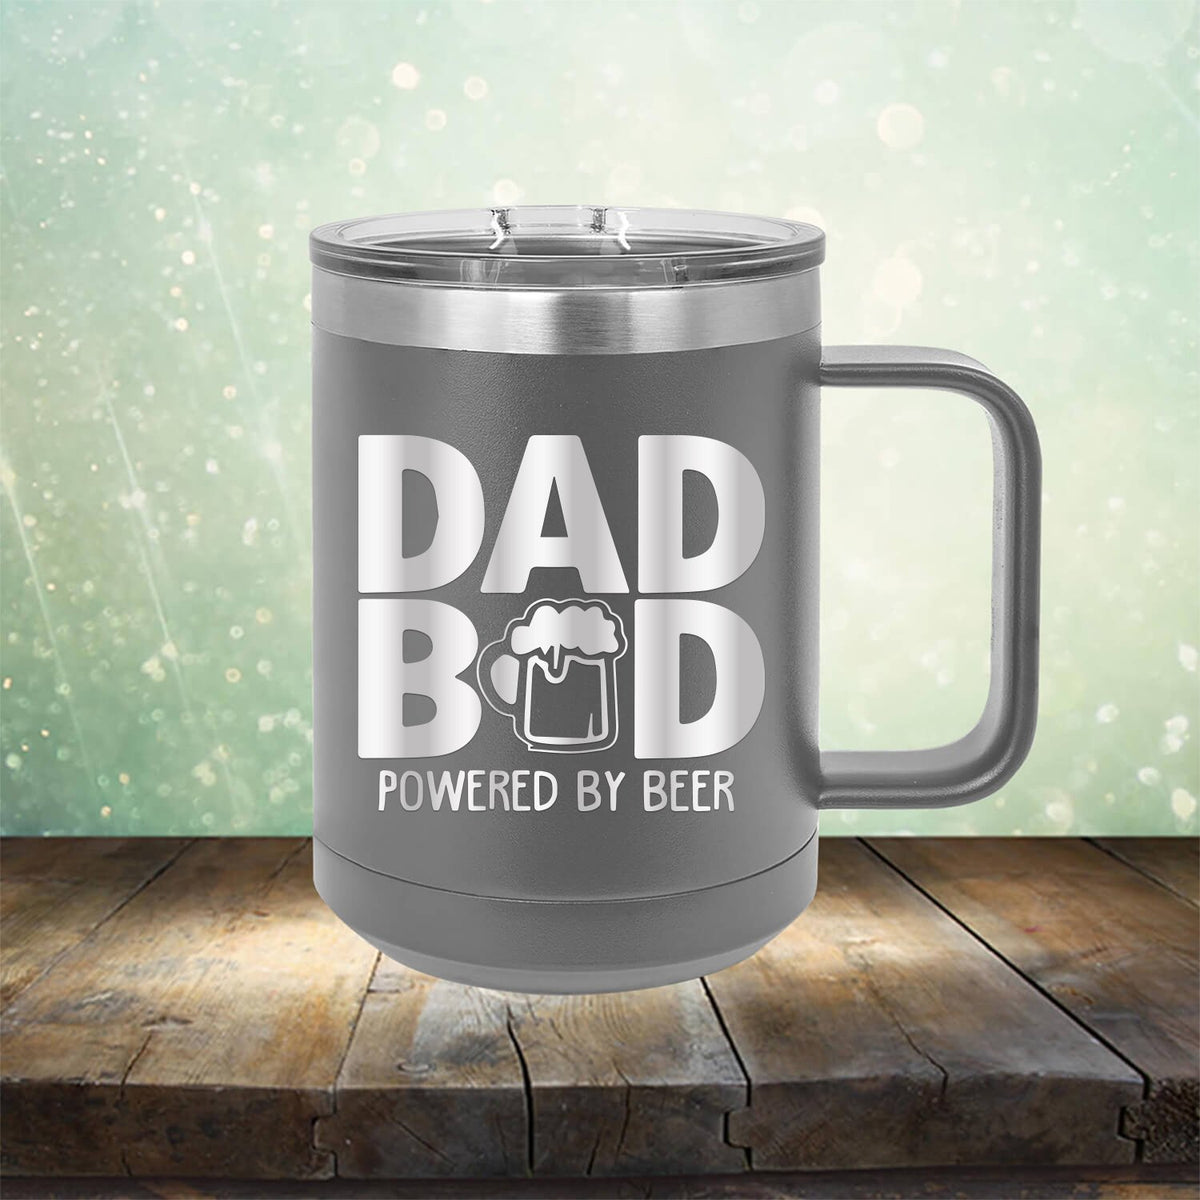 Dad Bod Powered by Beer